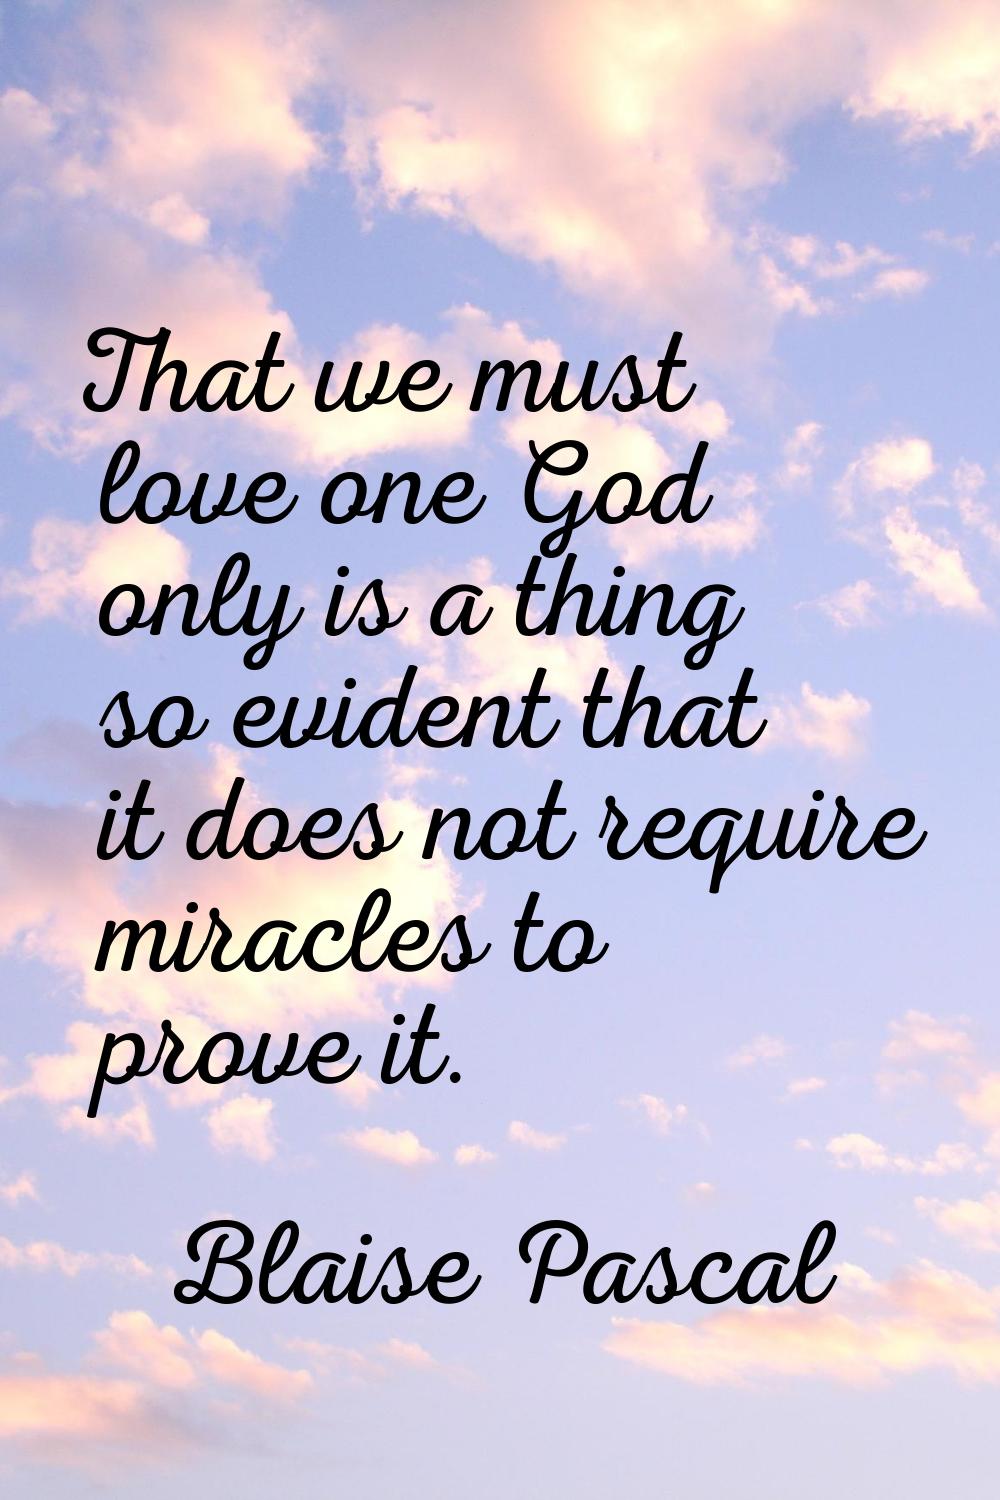 That we must love one God only is a thing so evident that it does not require miracles to prove it.